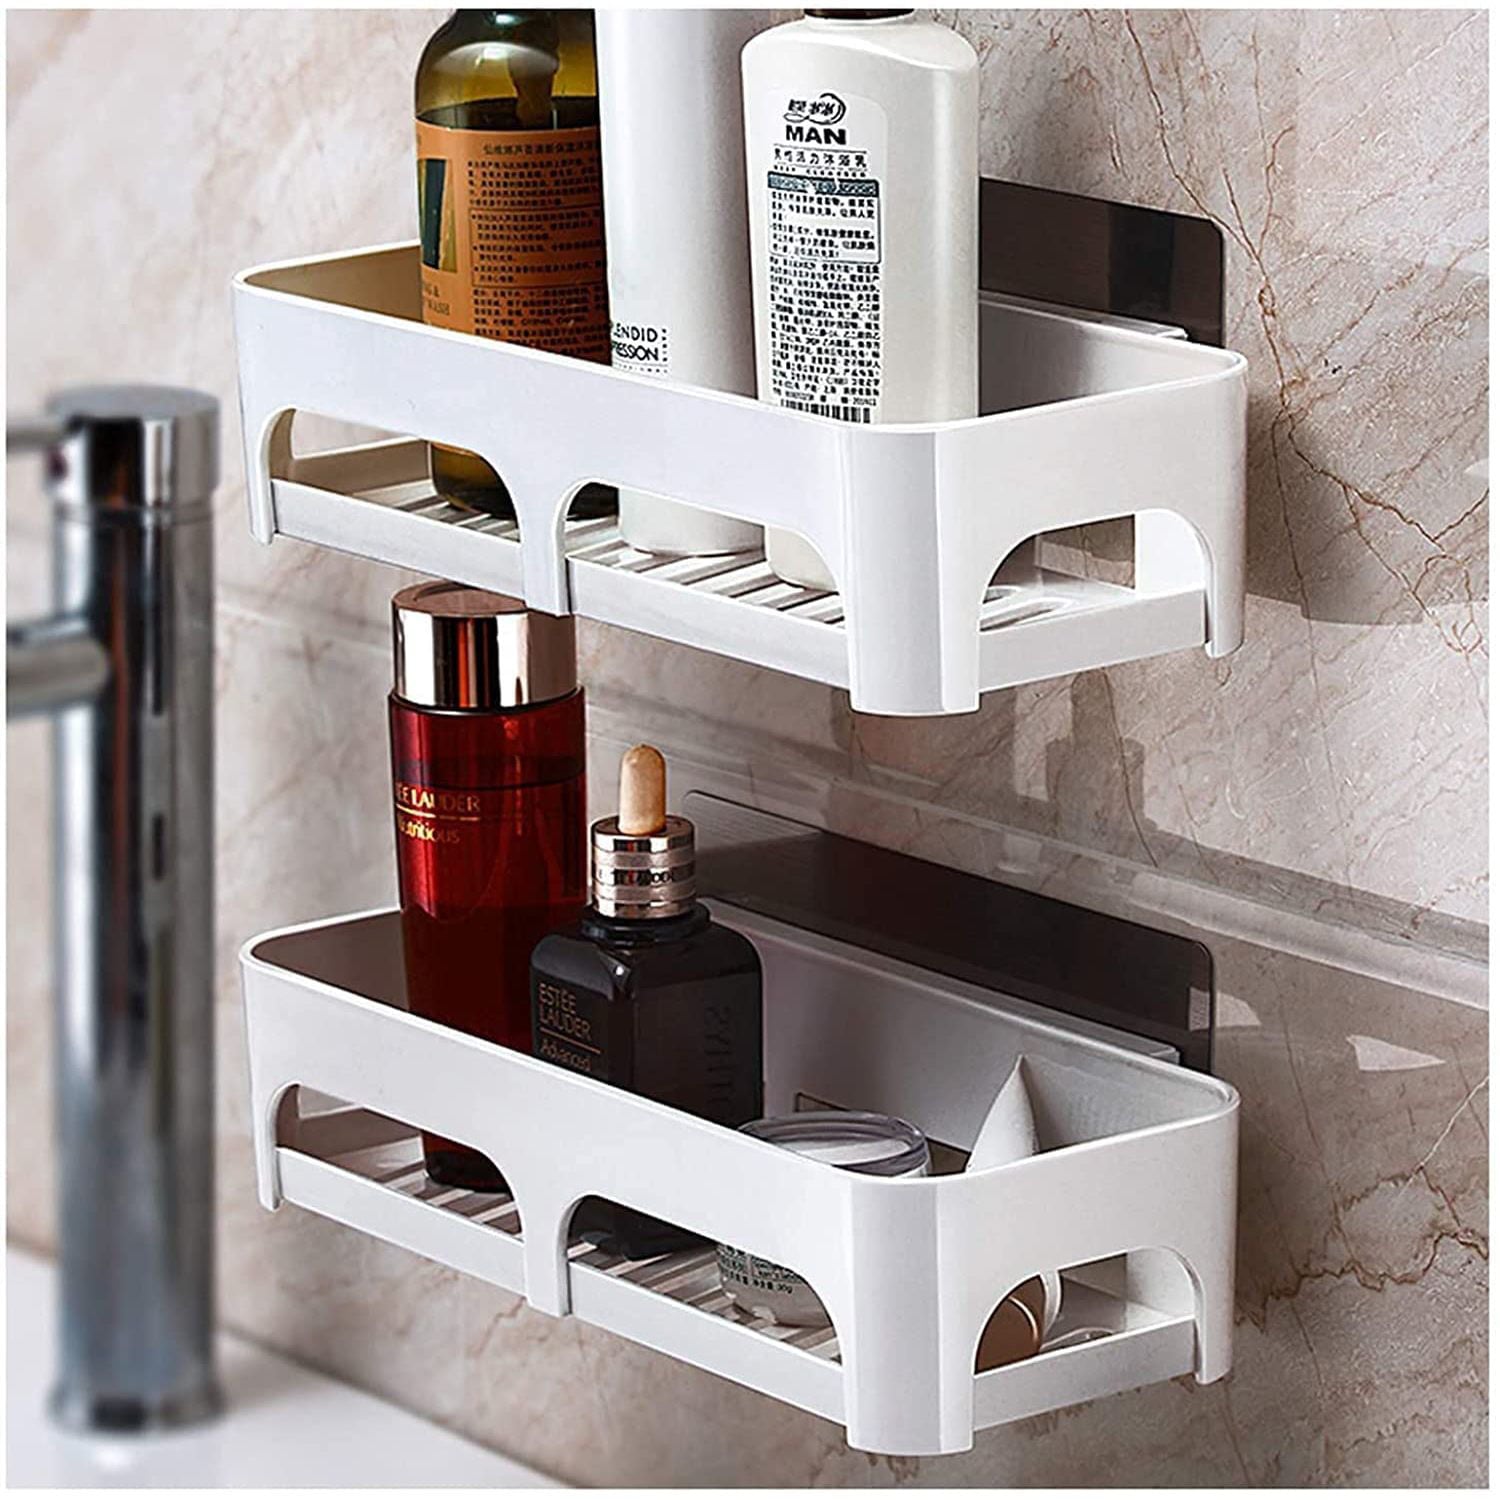 Shop PIN FAMILY Pin Family Stainless Steel Bathroom Corner Rack Stand ...